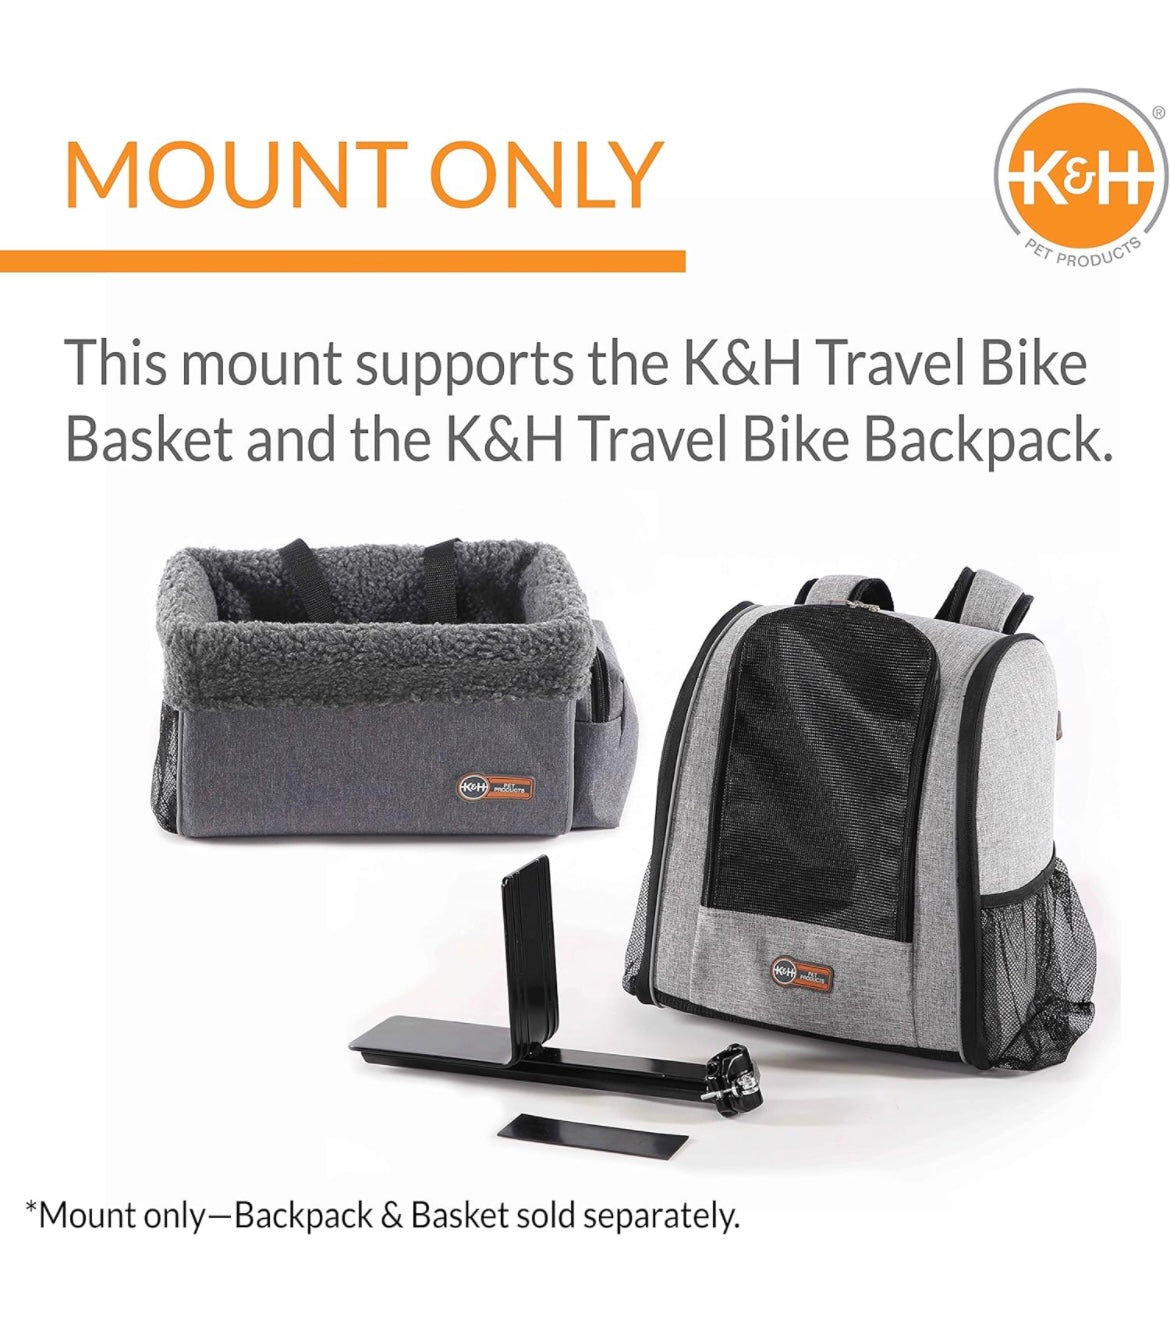 K&H Pet Products Universal Rear Bike Mount for Travel Bike Cat and Dog Bicycle Basket & Backpack Black Universal Fit Mount